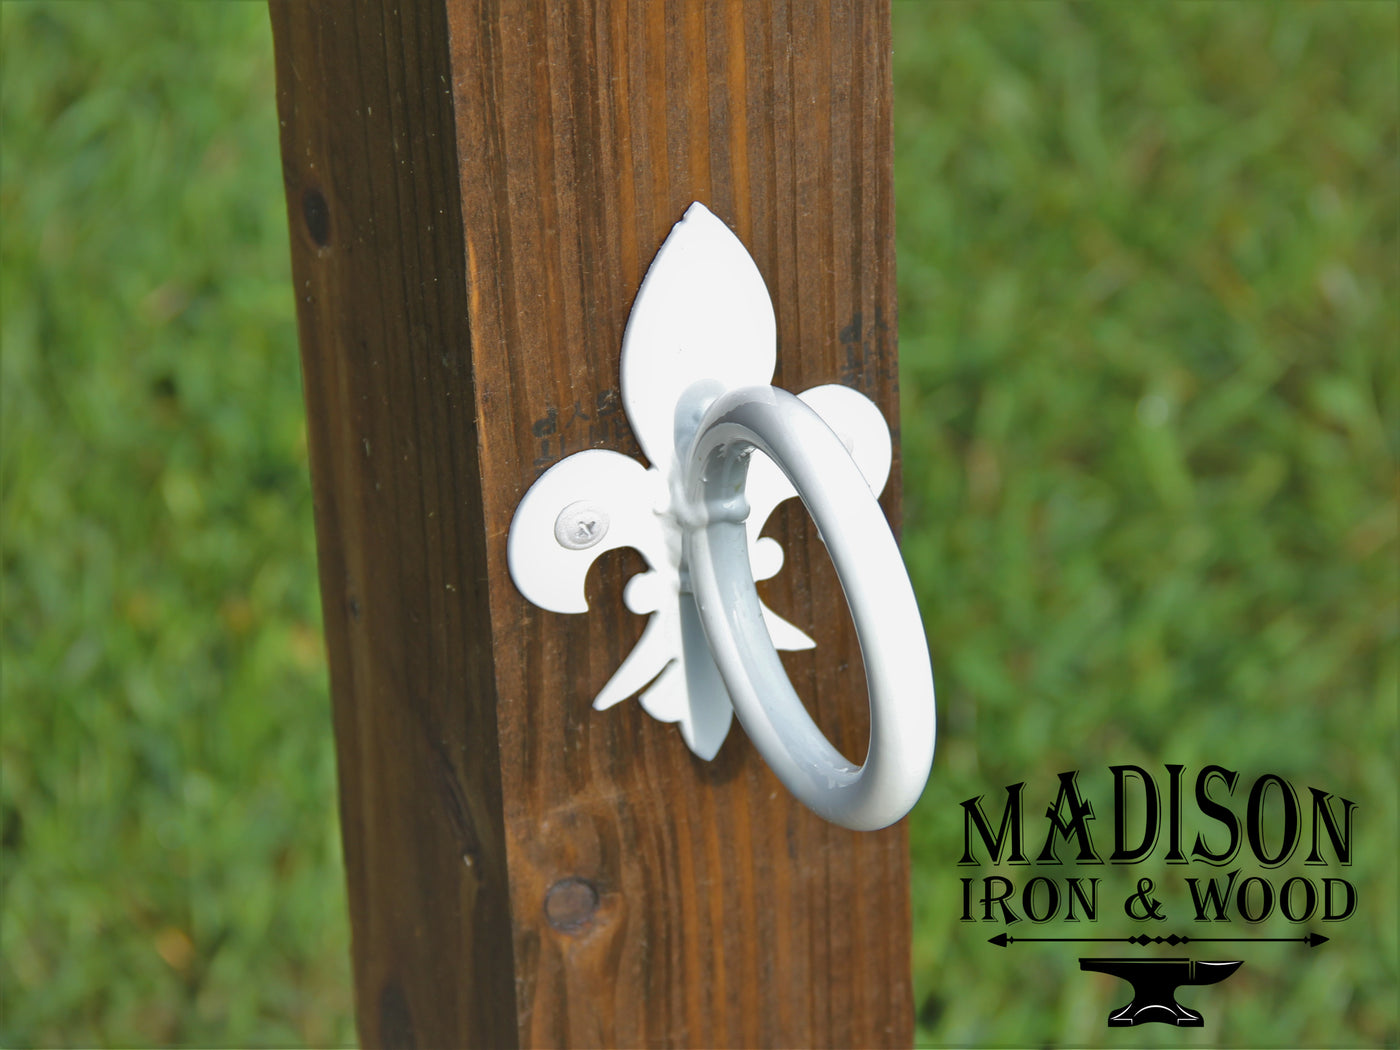 Fleur De Lis Nautical Rope Hardware, String Light holder - Madison Iron and Wood - Nautical Rope Holders - metal outdoor decor - Steel deocrations - american made products - veteran owned business products - fencing decorations - fencing supplies - custom wall decorations - personalized wall signs - steel - decorative post caps - steel post caps - metal post caps - brackets - structural brackets - home improvement - easter - easter decorations - easter gift - easter yard decor